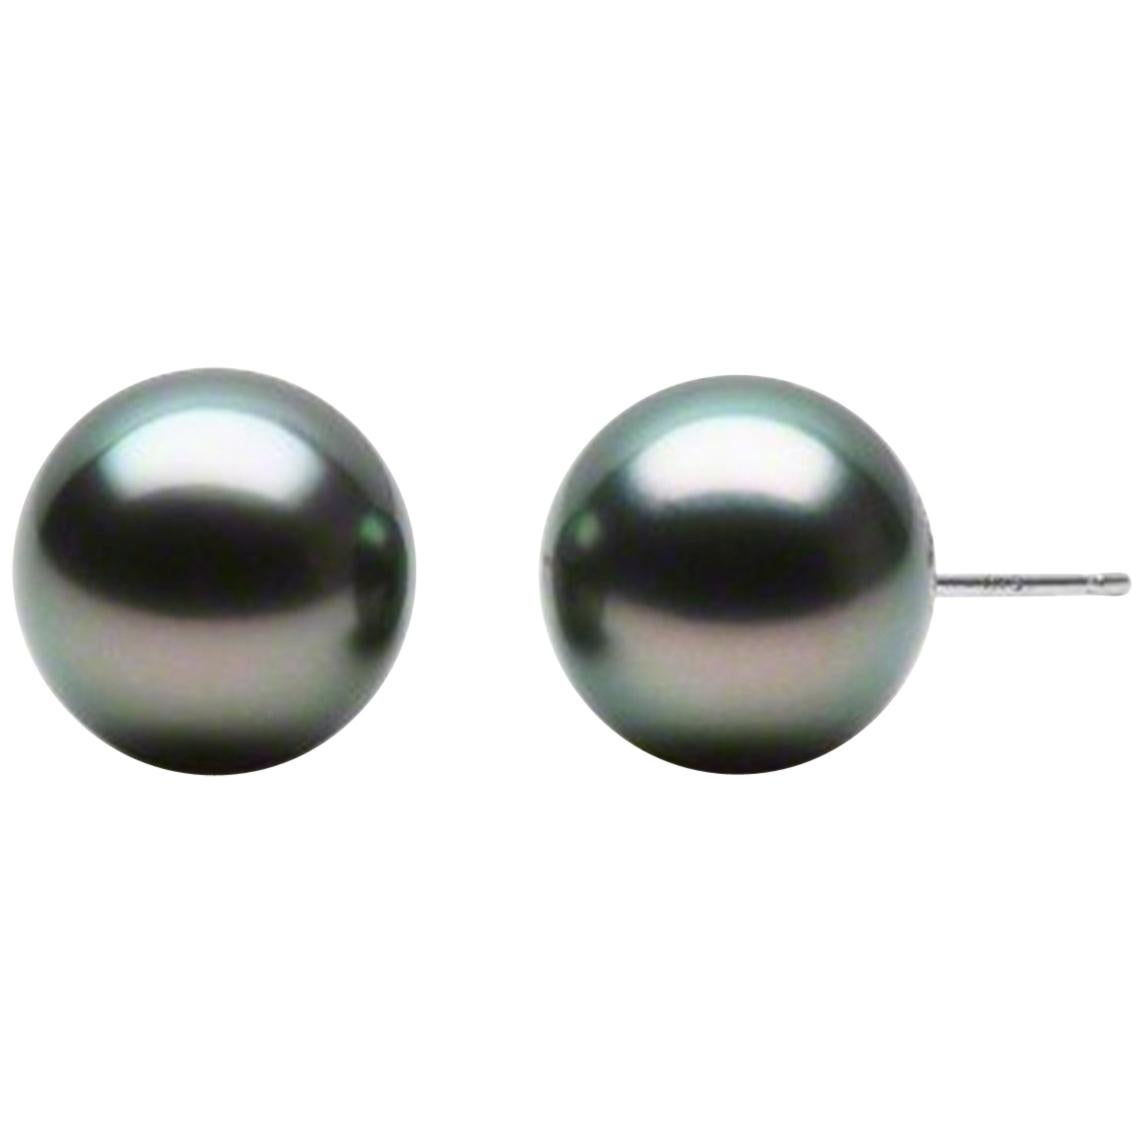 AAA Quality Round High Luster Tahitian Pearl Earring Stud on 14 Karat White Gold For Sale